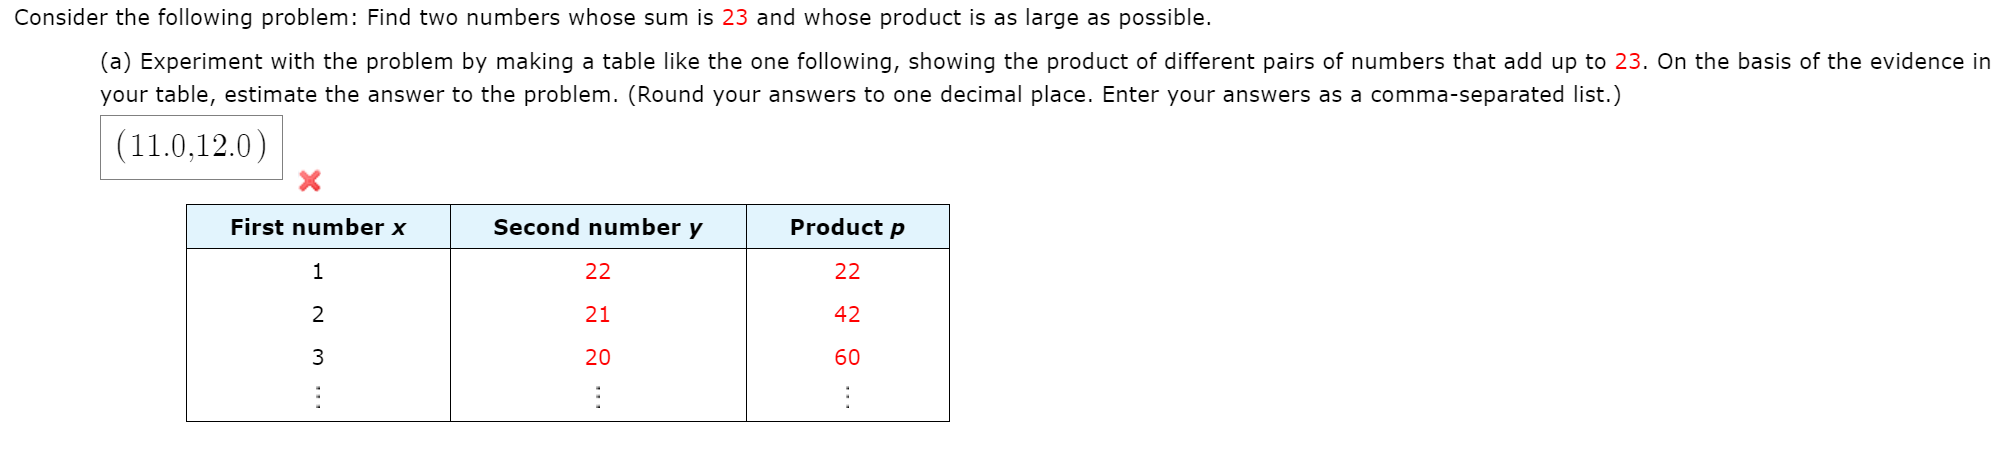 Consider the following problem: Find two numbers whose sum is 23 and whose product is as large as possible.
